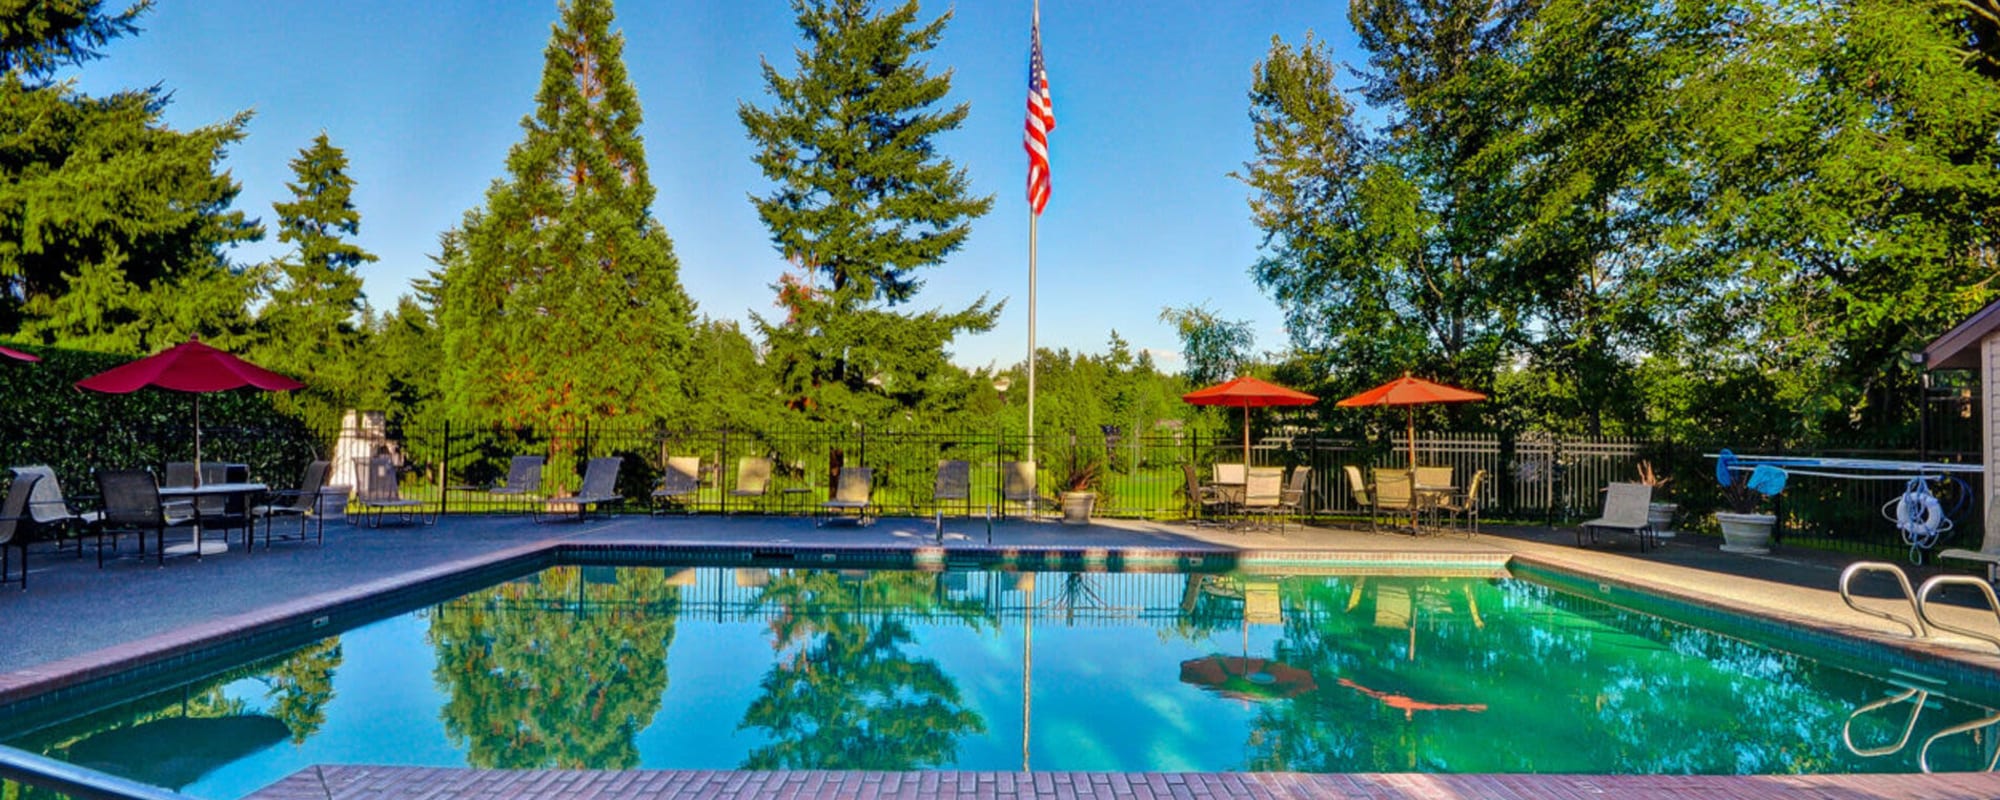 Swimming pool with flag at The Fairways in Tacoma, Washington